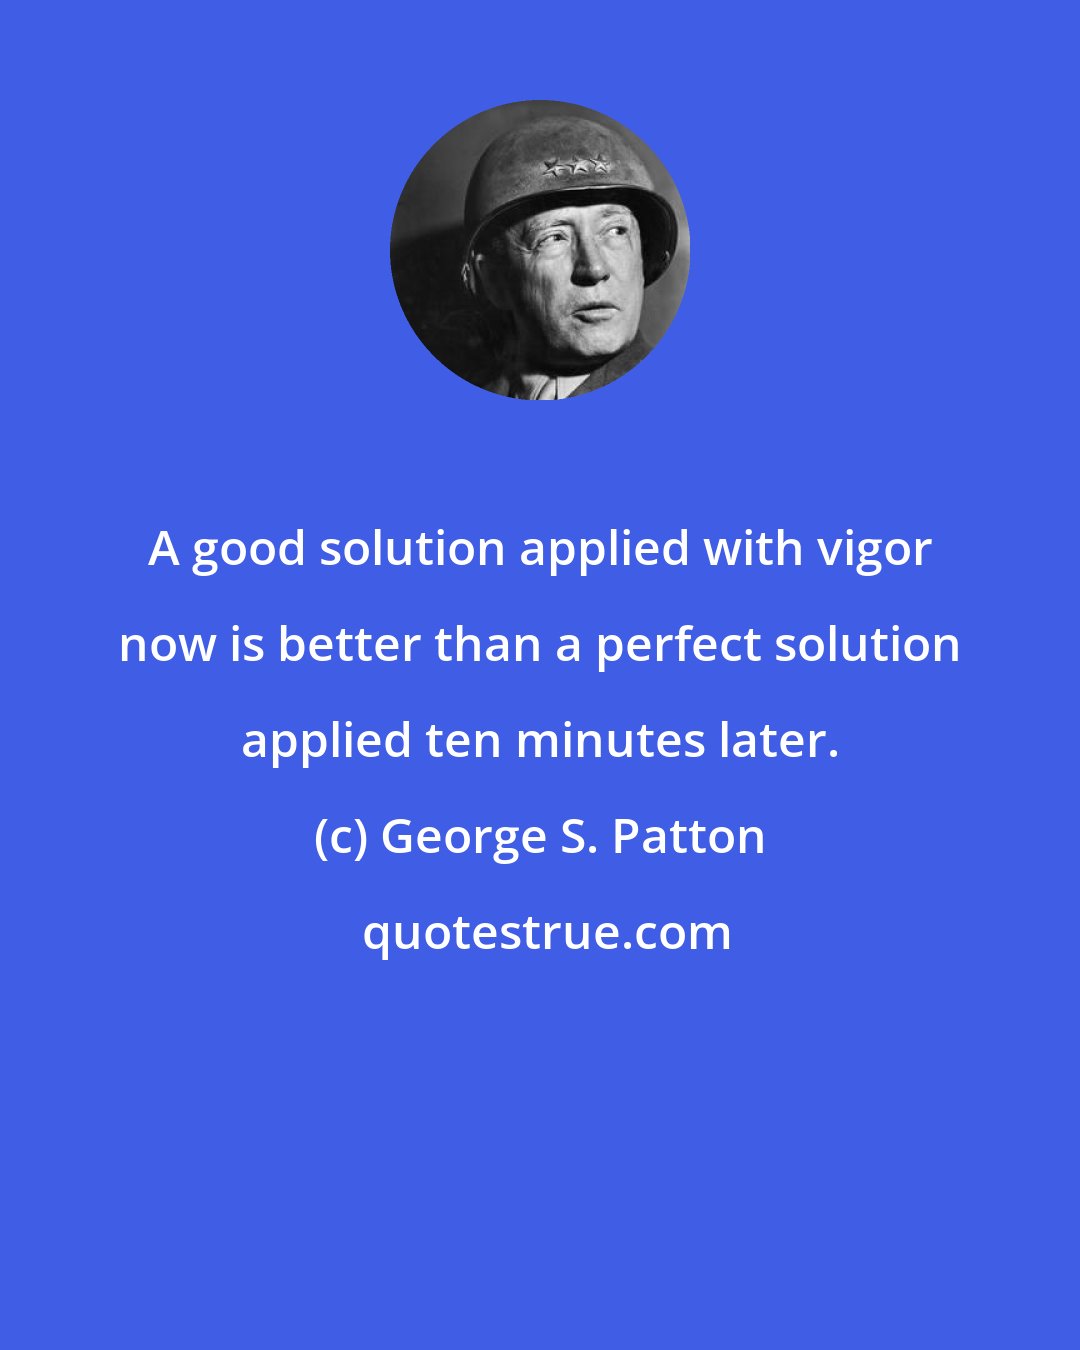 George S. Patton: A good solution applied with vigor now is better than a perfect solution applied ten minutes later.